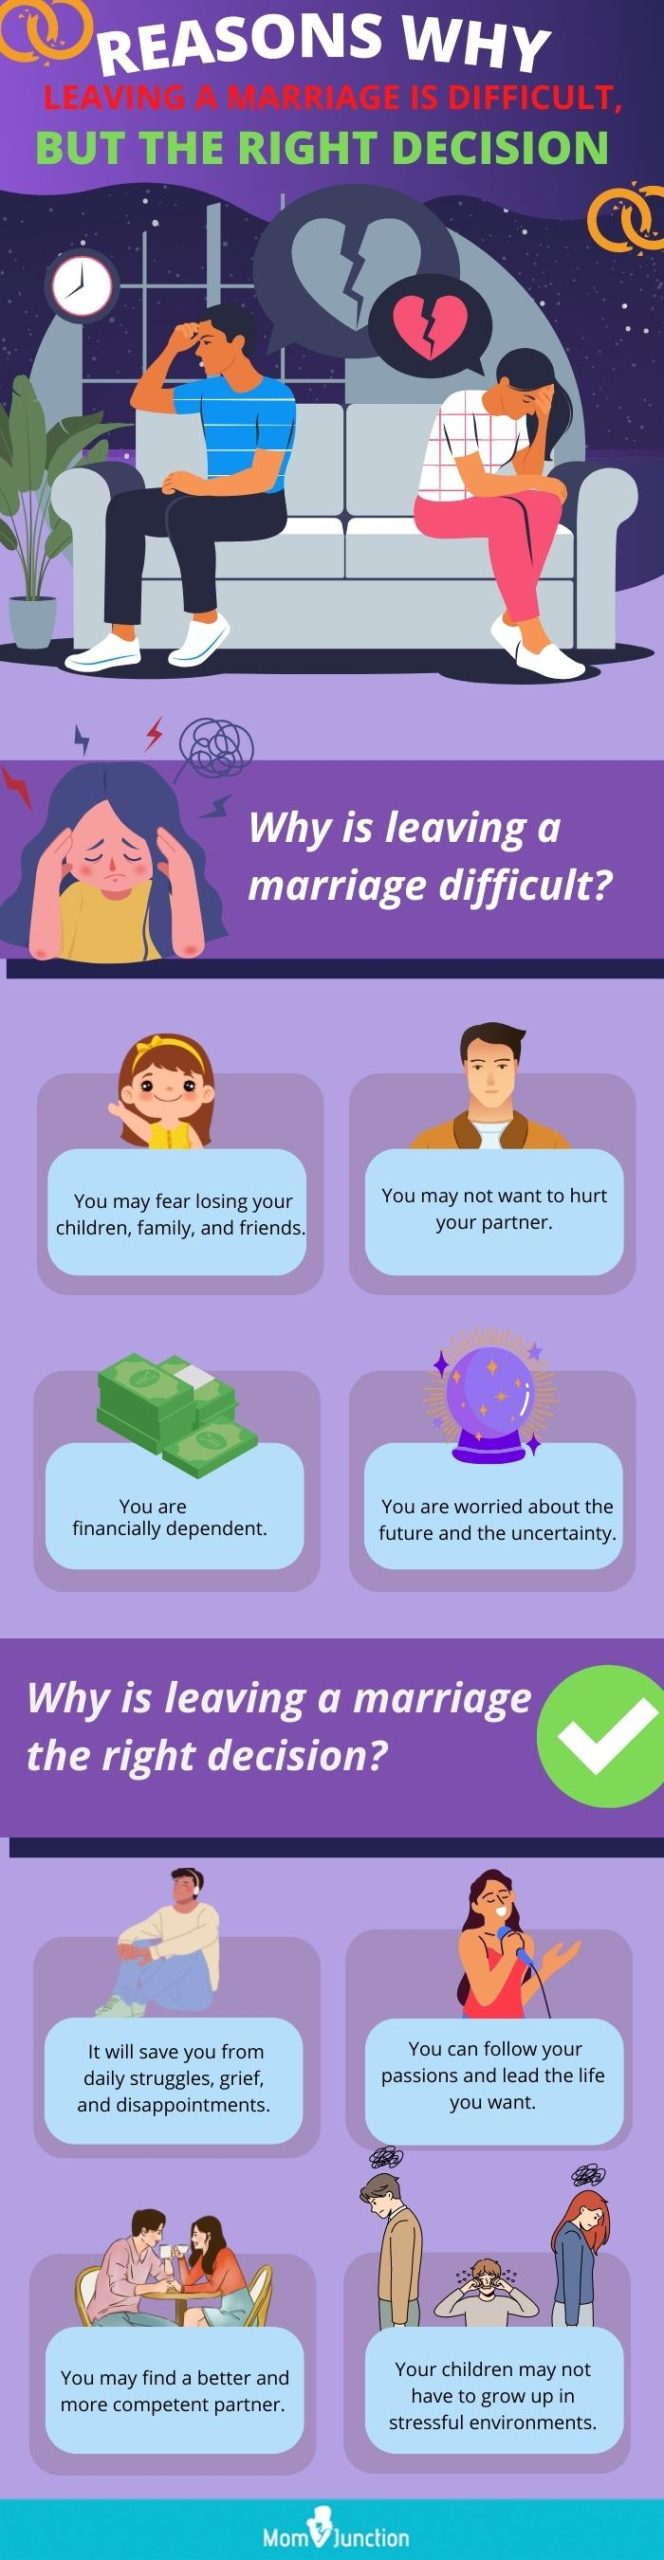 reasons why leaving a marriage is difficult, but the right decision [infographic]